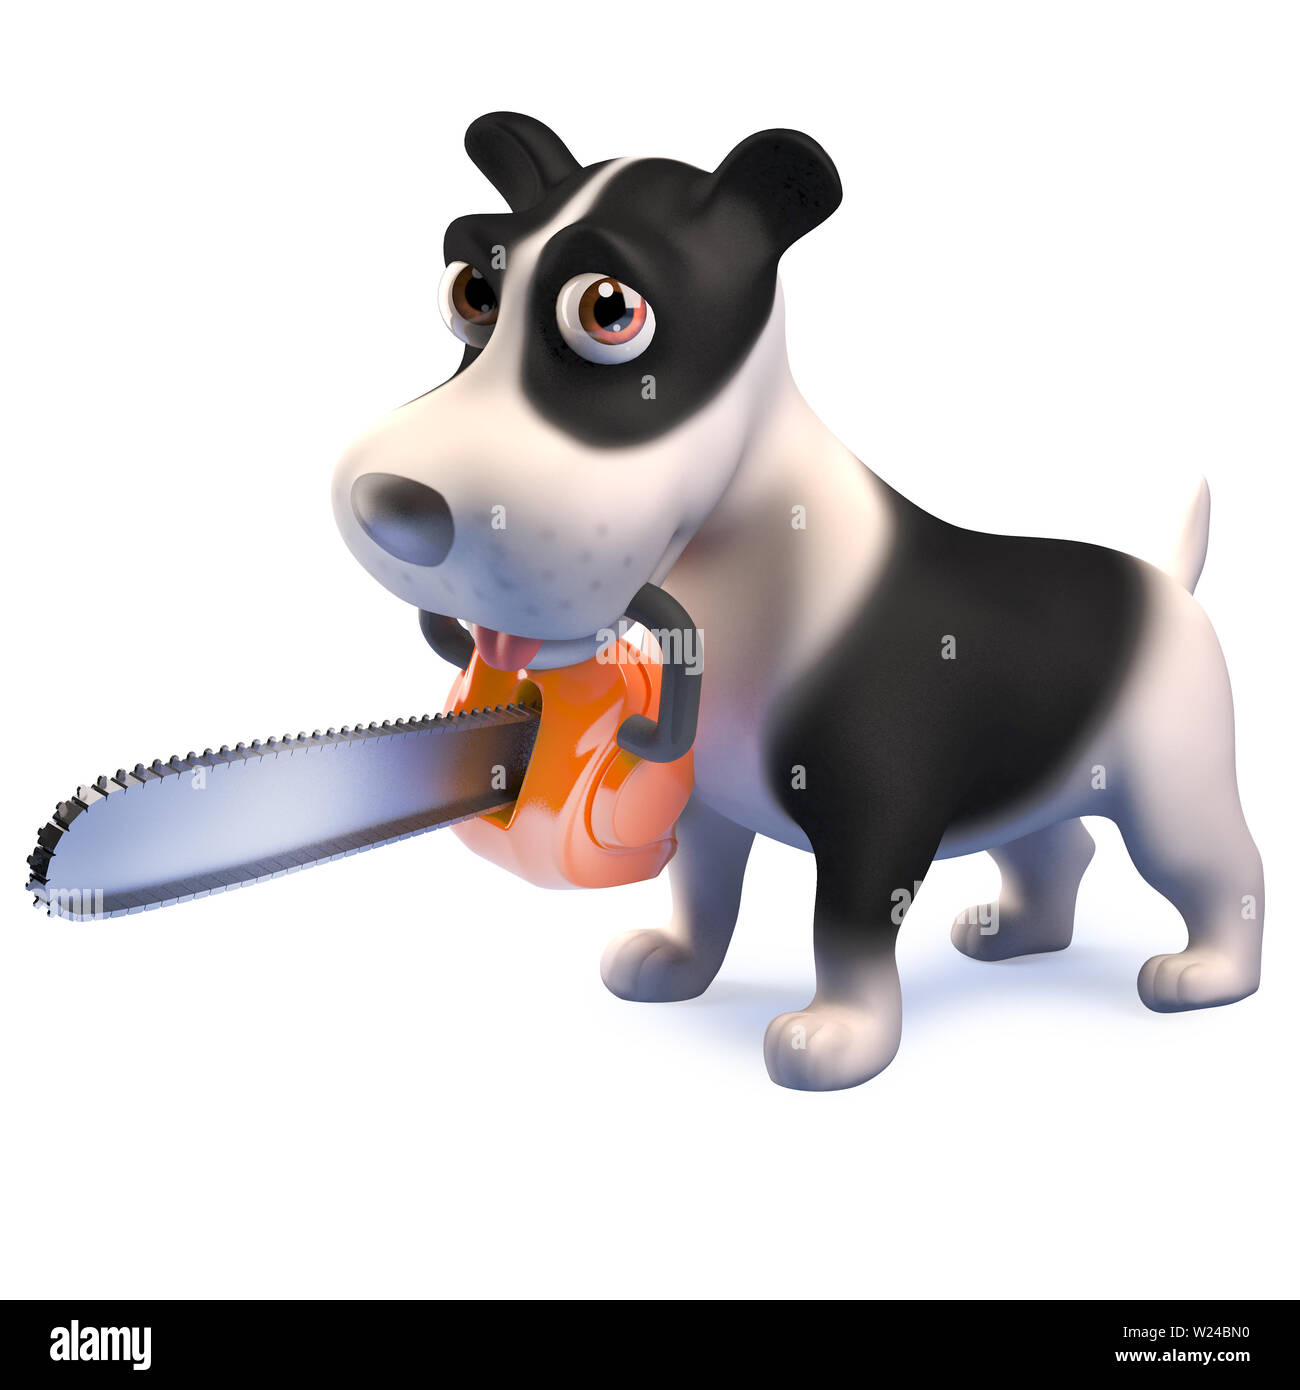 Rendered 3d image of a cartoon black and white puppy dog character holding  a chainsaw in its mouth Stock Photo - Alamy